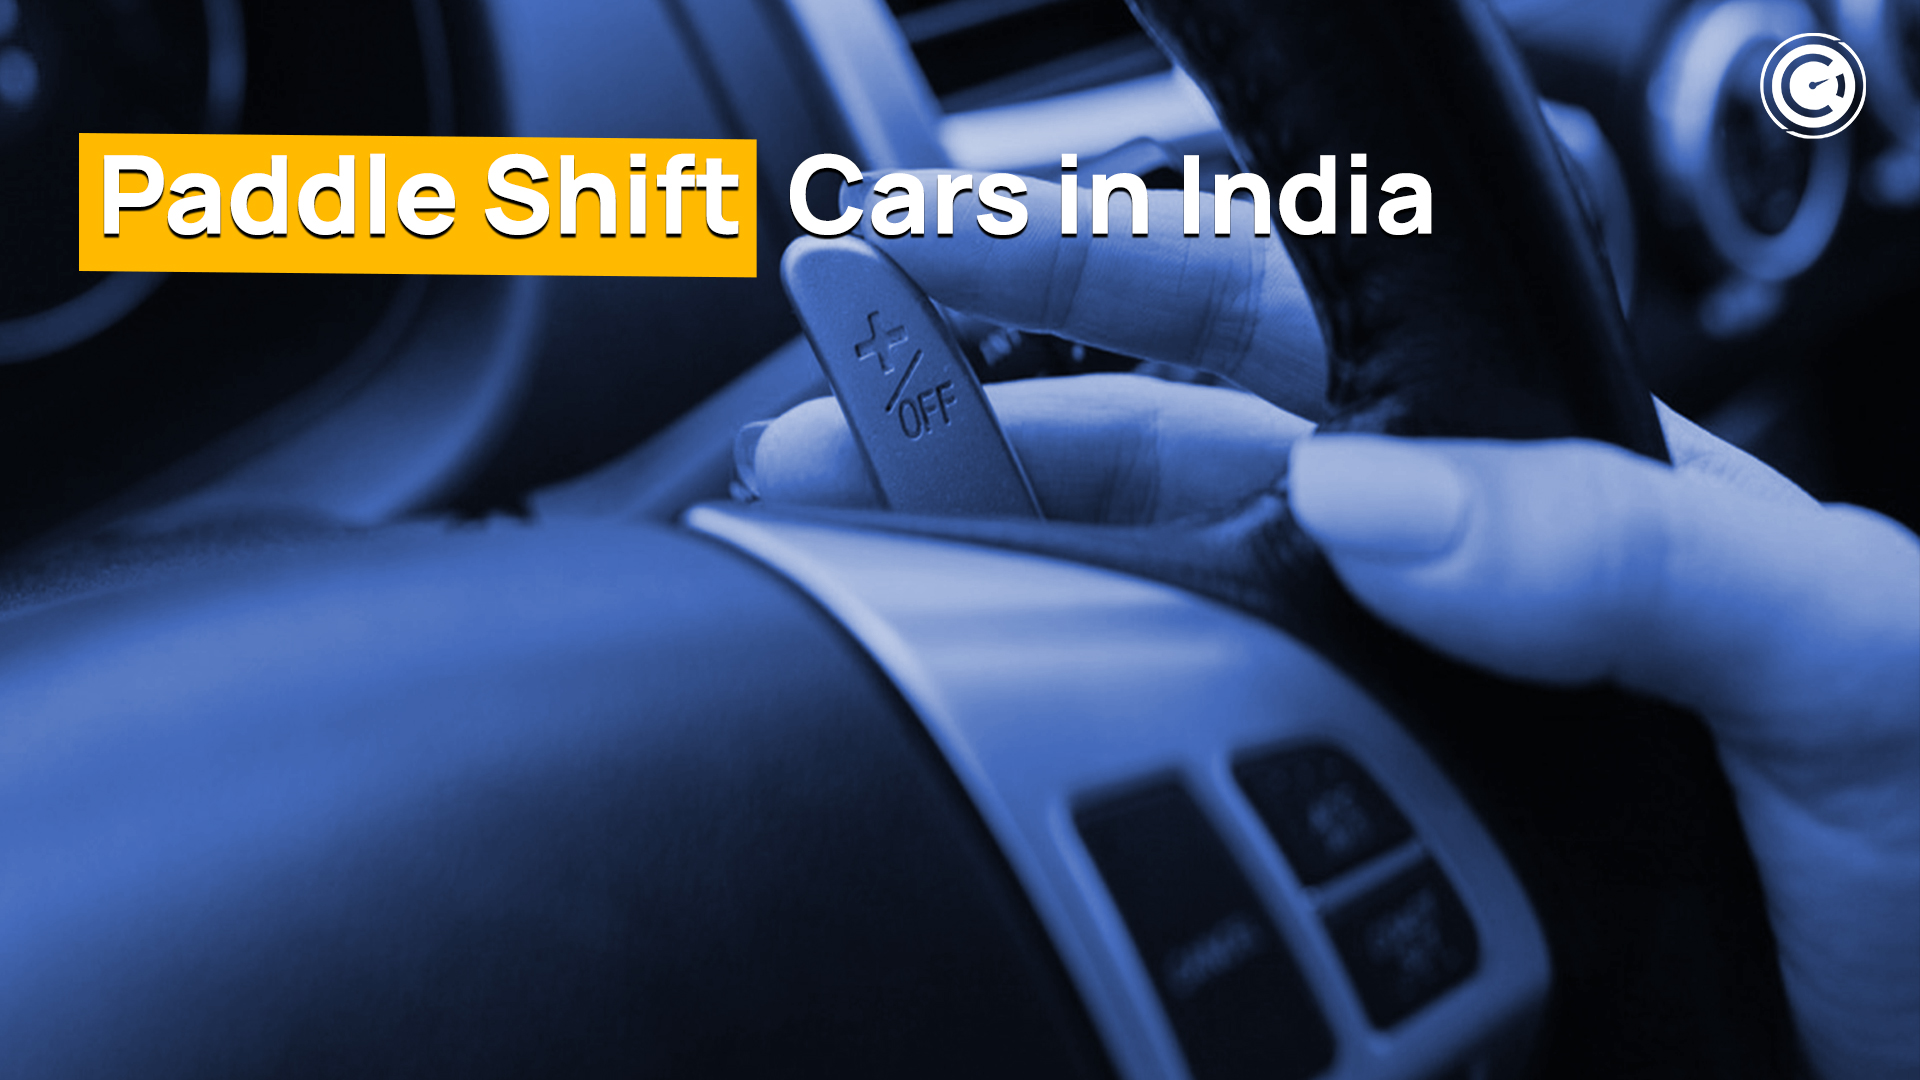 Top 9 Paddle Shift Cars in India - GaragePro Blog